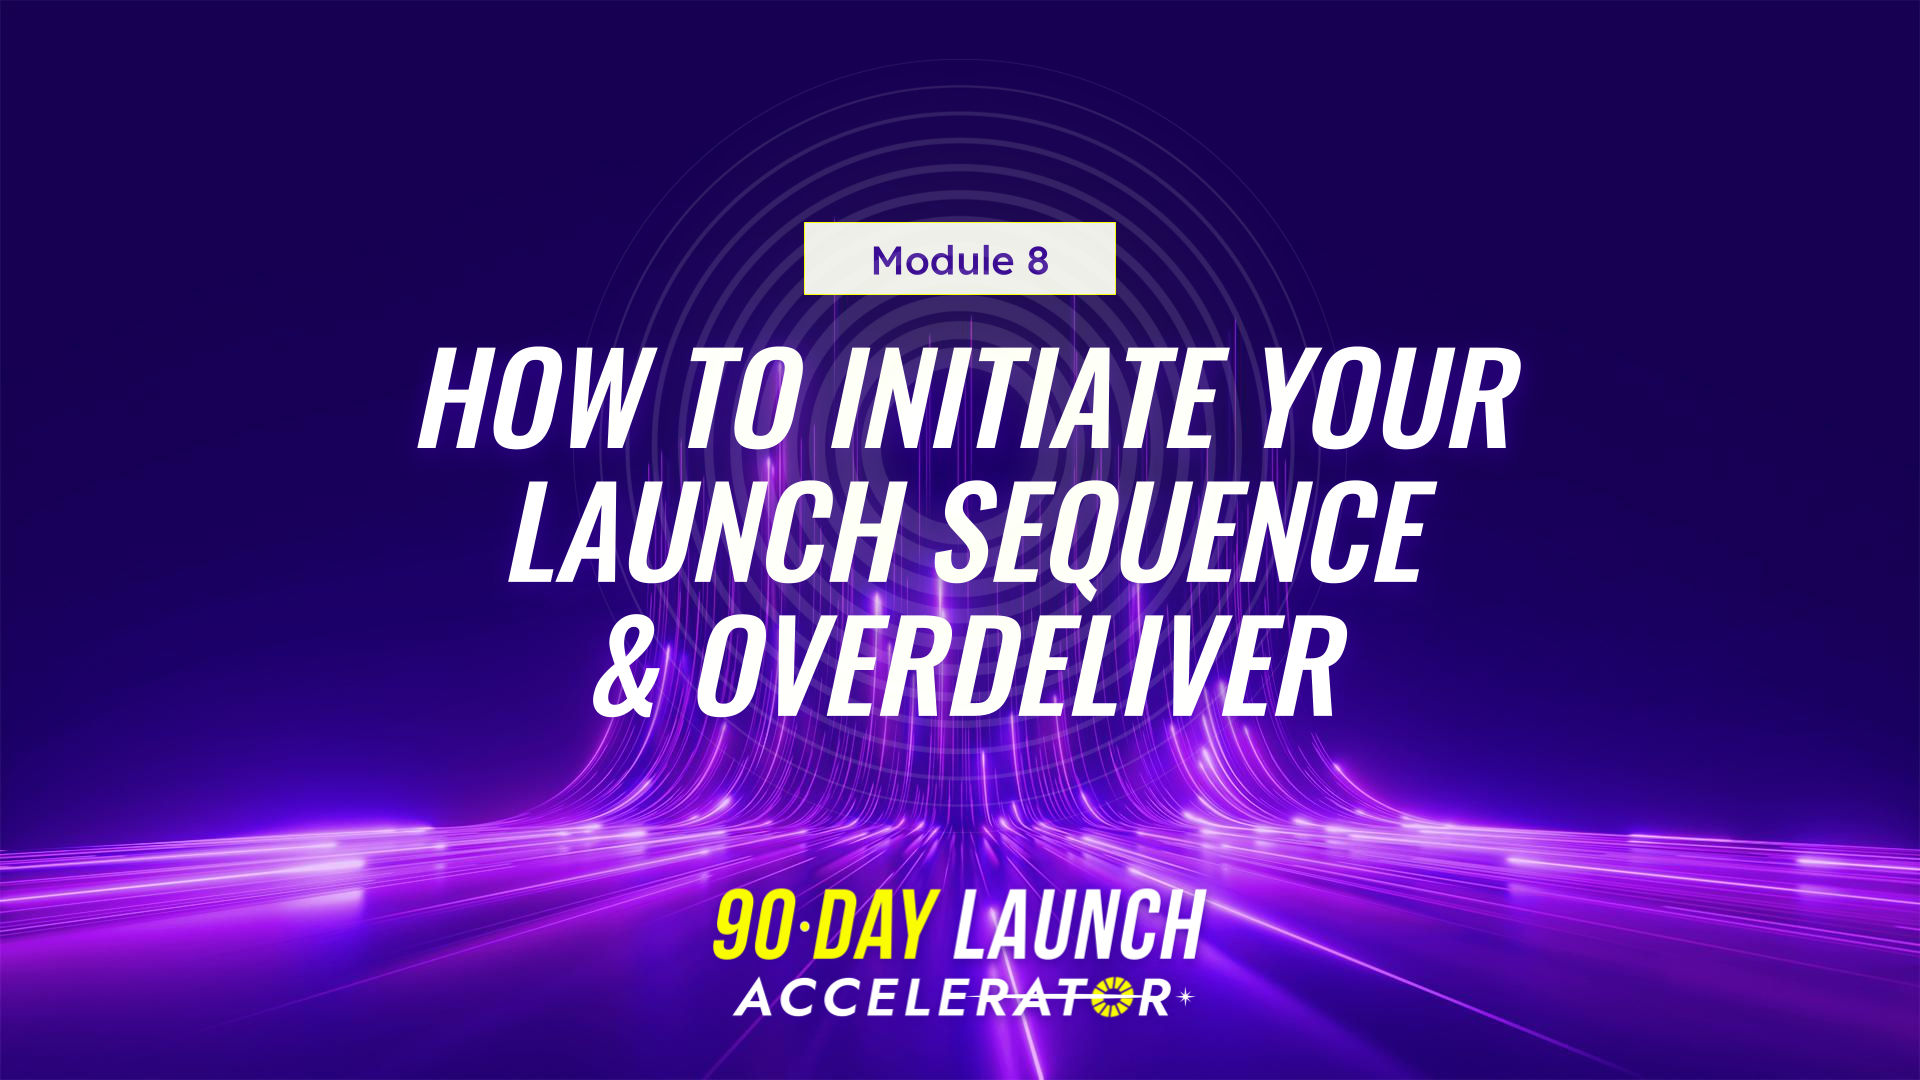 Module 8 How to Initiate Your Launch Sequence & Overdeliver